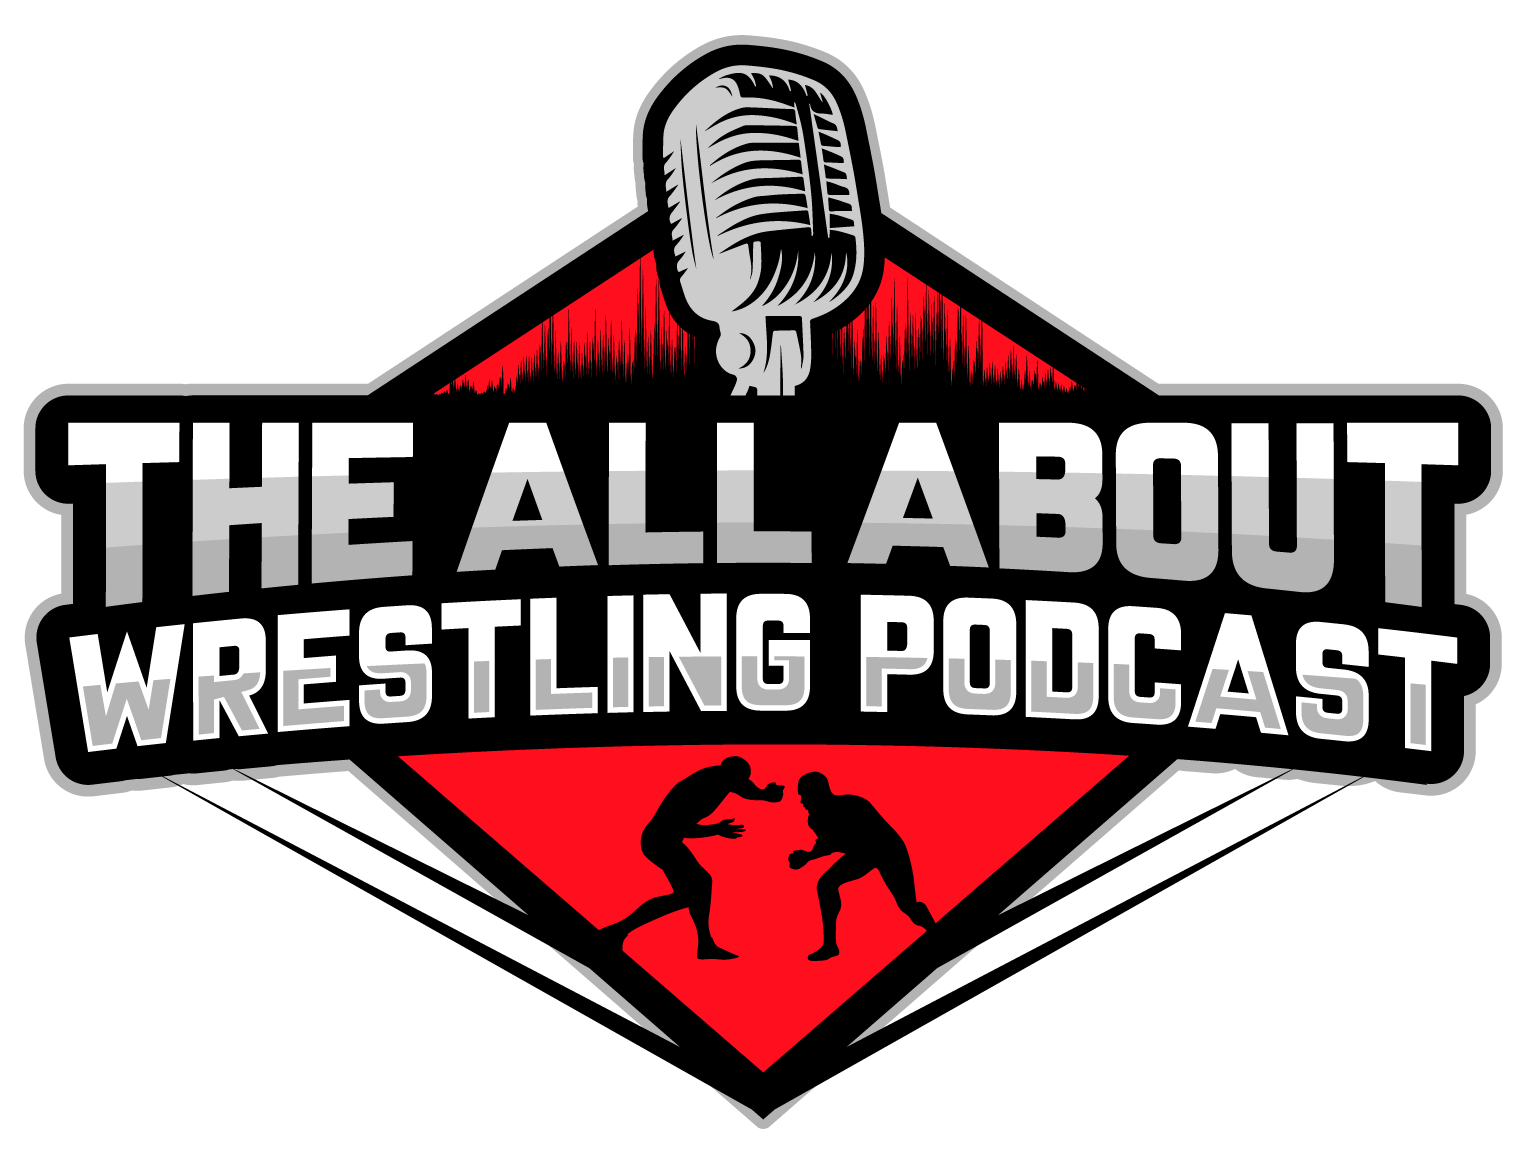 The All About Wrestling Podcast logo